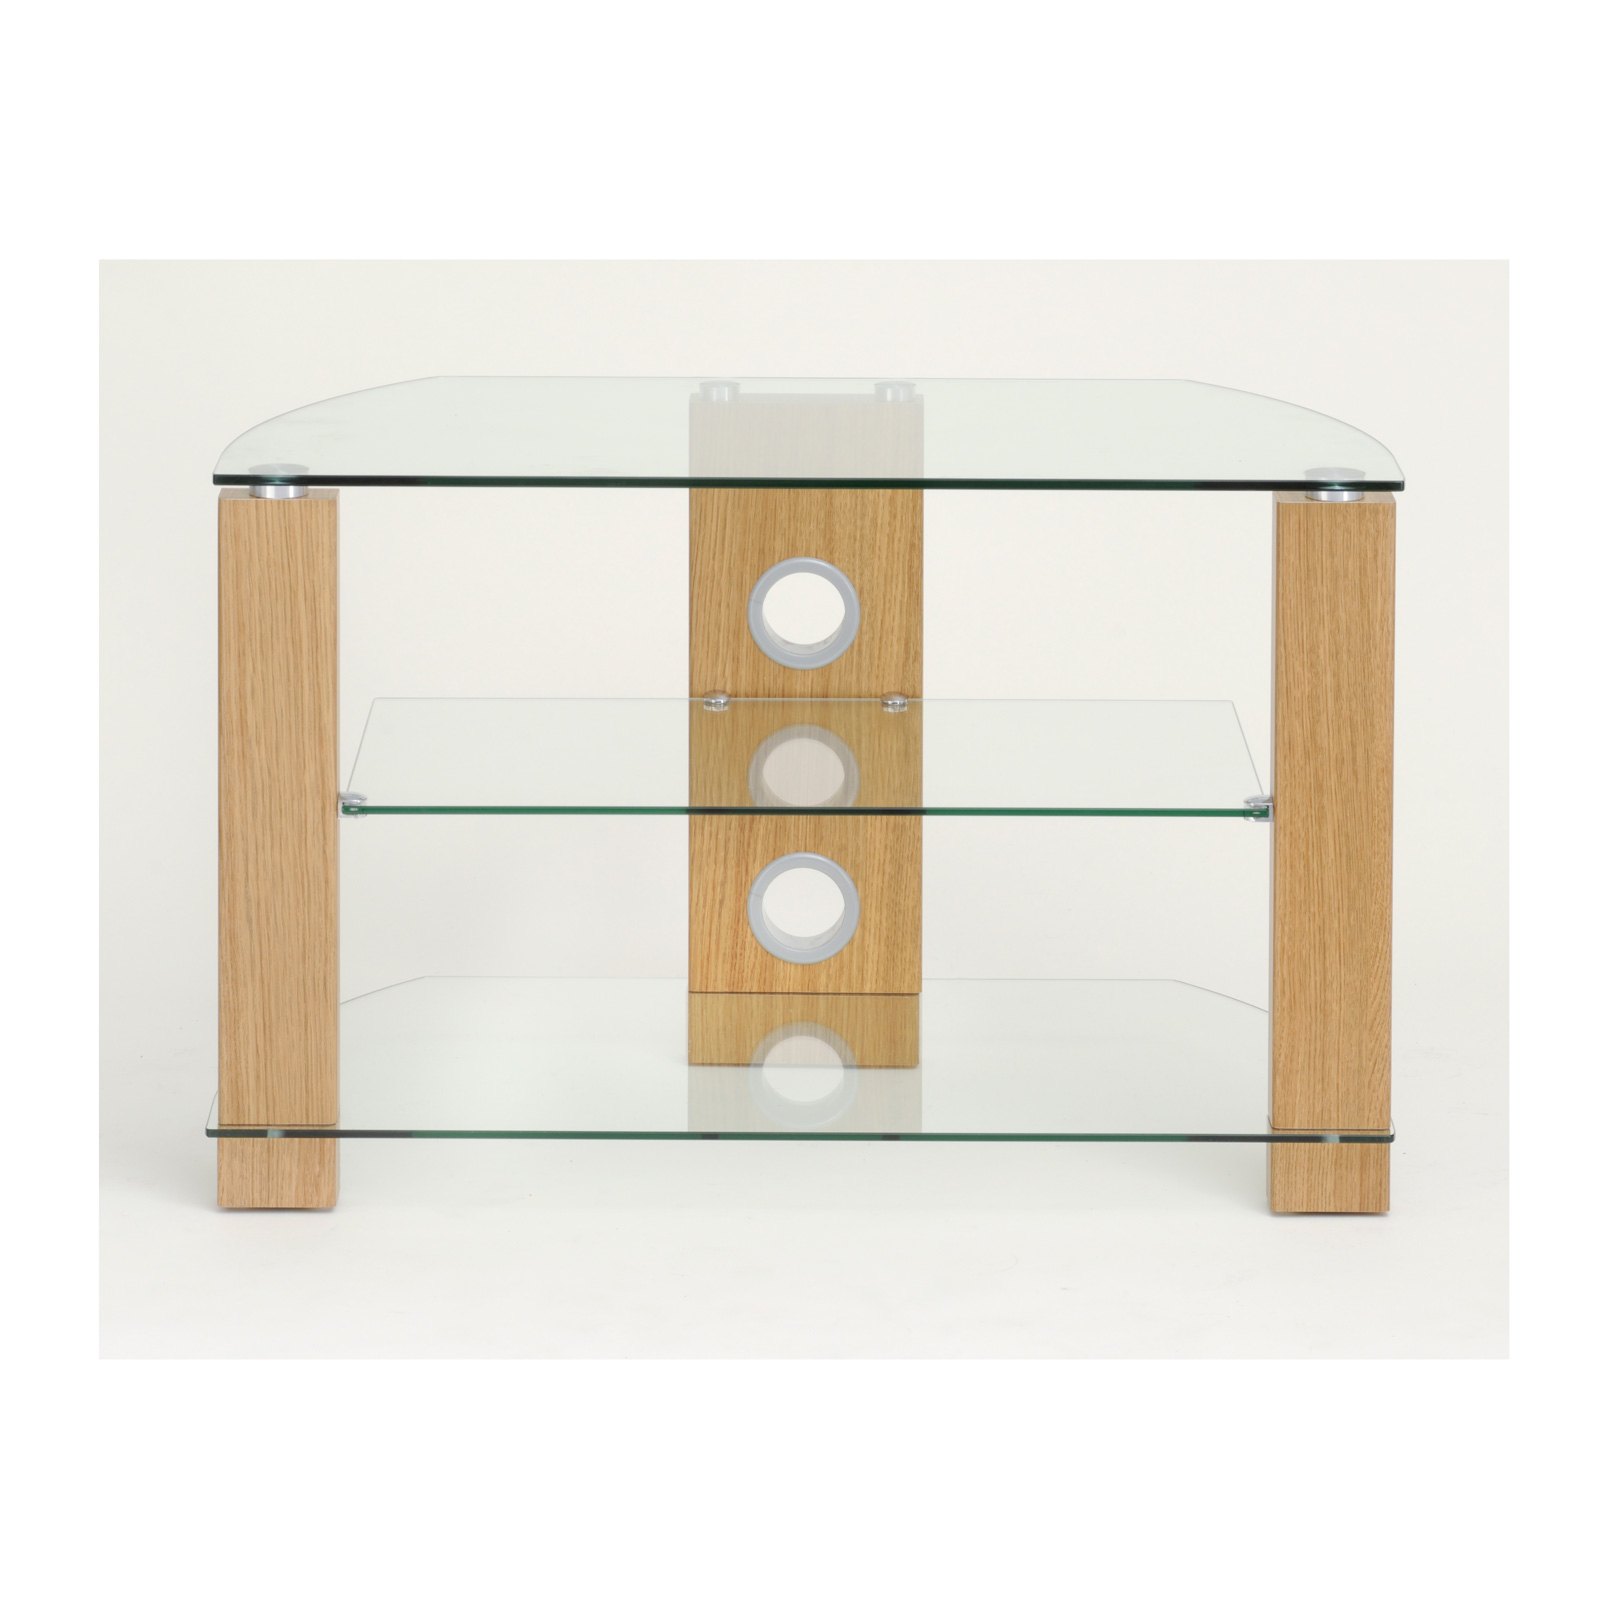 Image of TTAP L630 800 3OC Vision 800mm TV Stand in Light Oak with Clear Glass